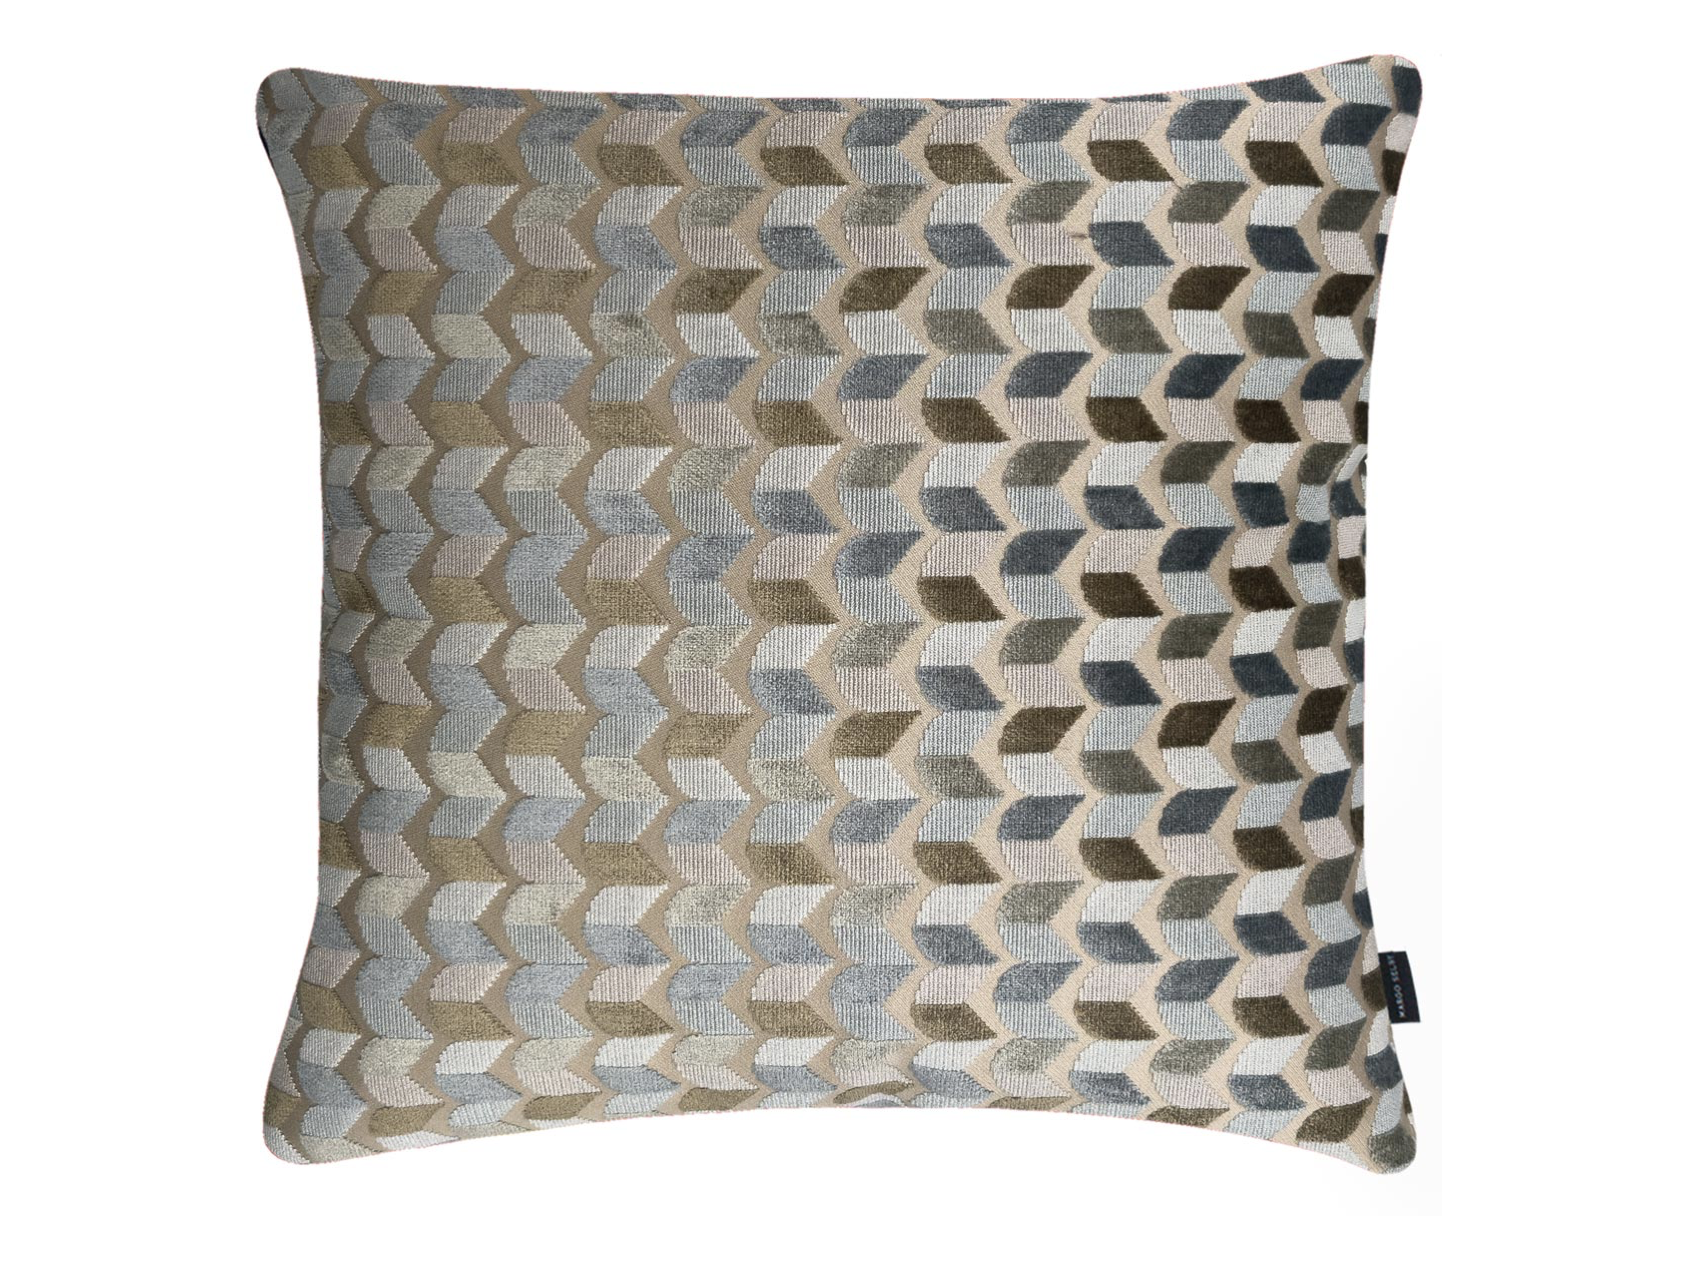 Basie Steel Blue pillow by Margo Selby